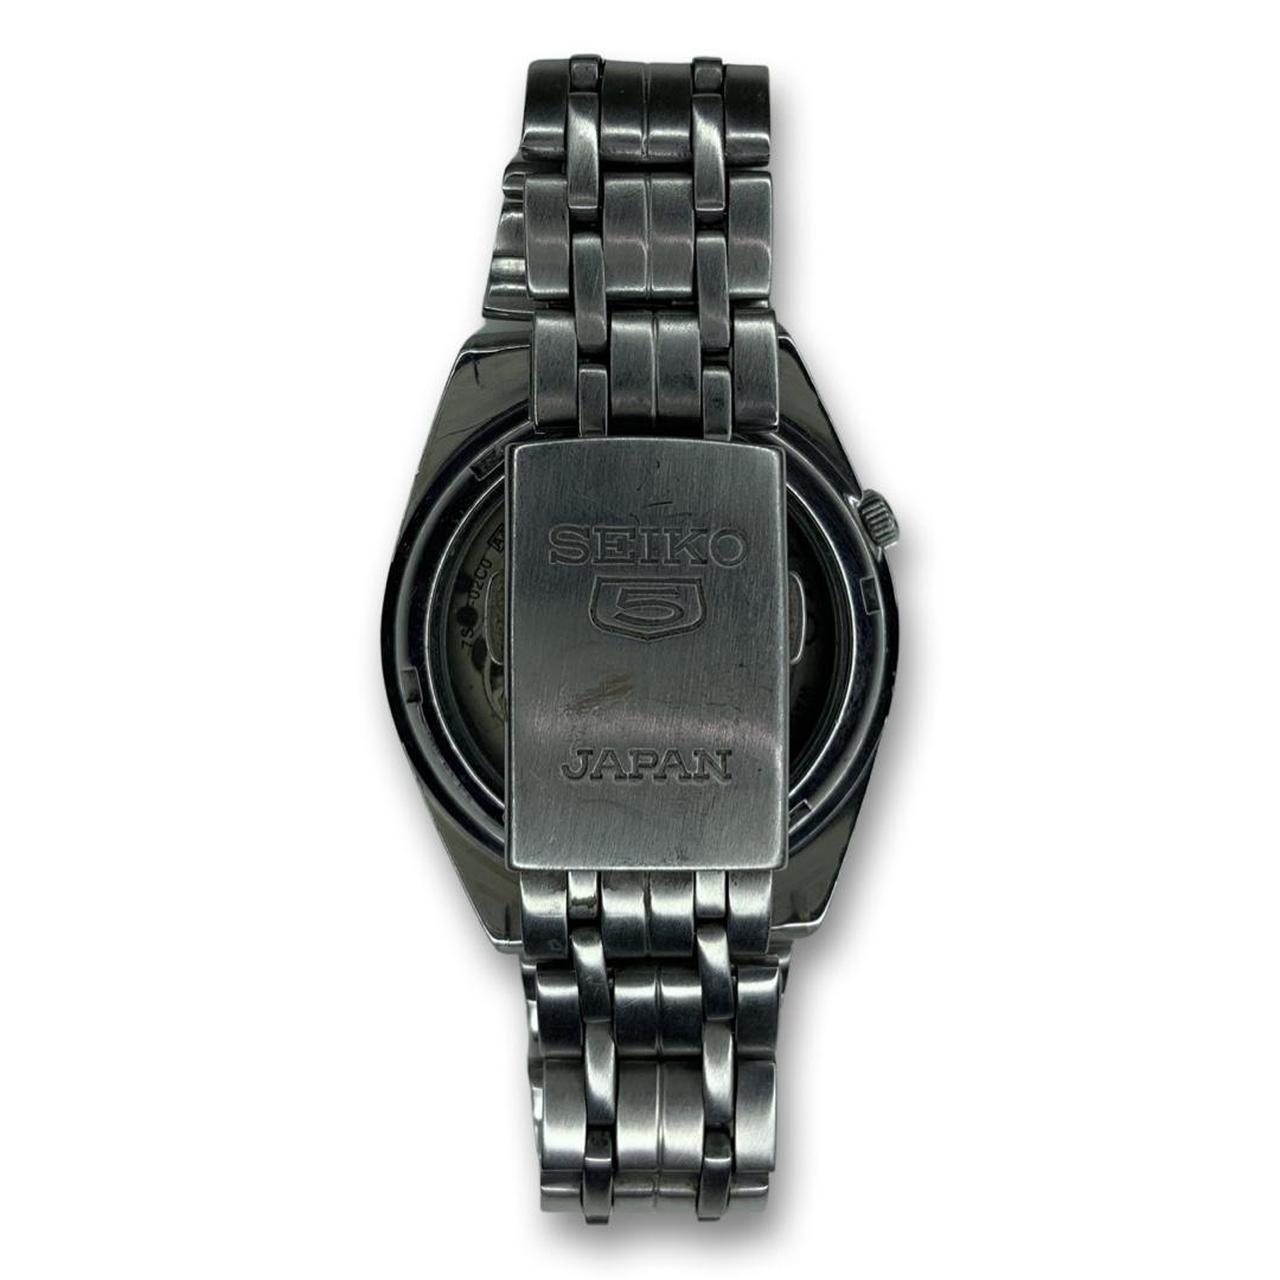 Seiko Men's Silver and Black Watch (2)